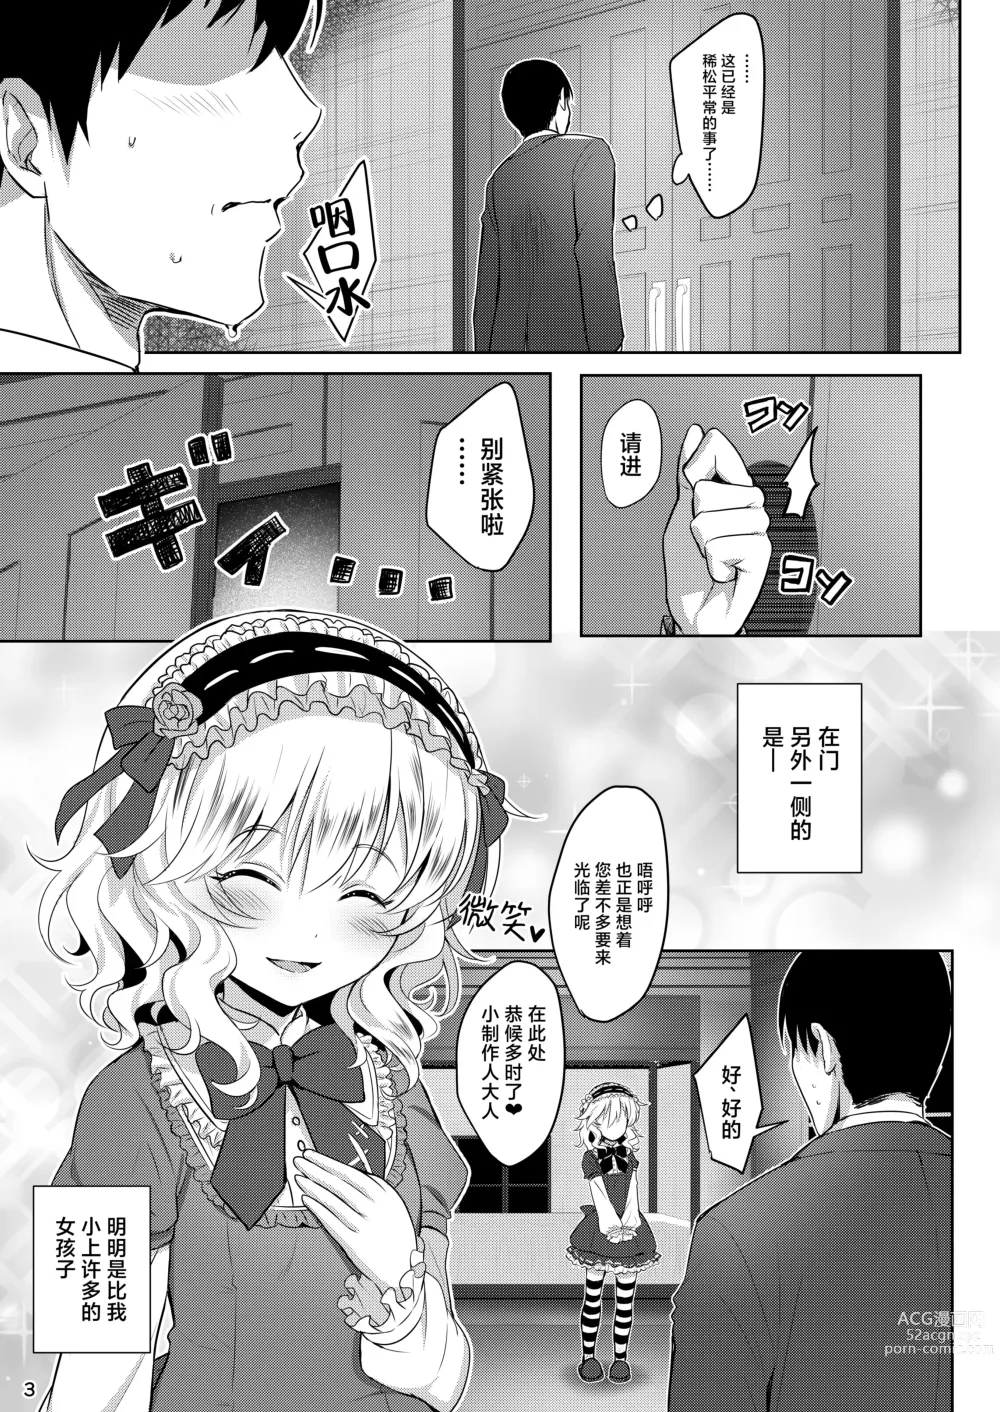 Page 2 of doujinshi CHAMMERs